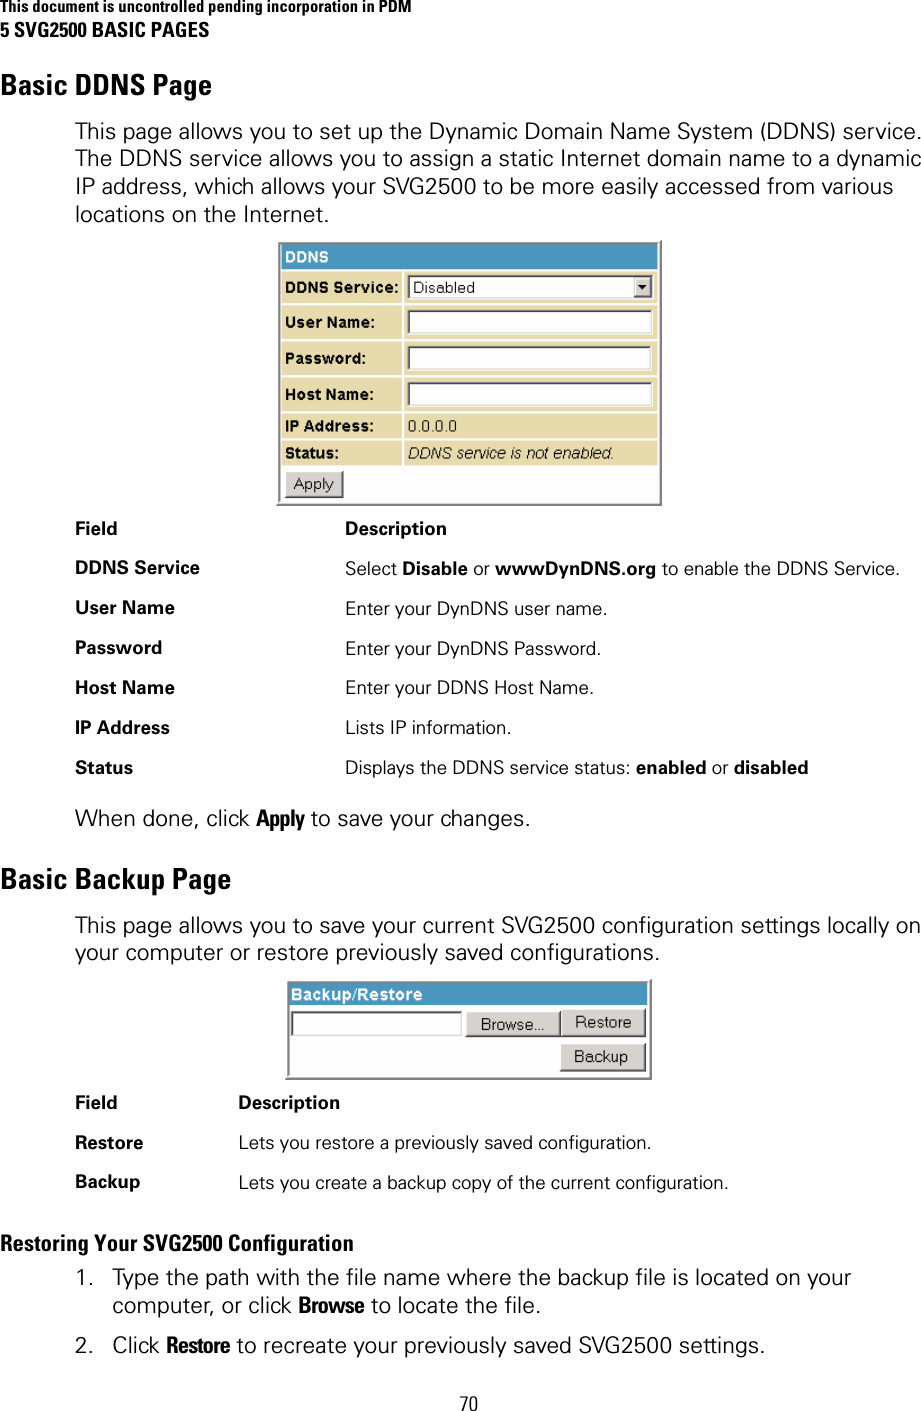 This document is uncontrolled pending incorporation in PDM 5 SVG2500 BASIC PAGES 70 Basic DDNS Page This page allows you to set up the Dynamic Domain Name System (DDNS) service. The DDNS service allows you to assign a static Internet domain name to a dynamic IP address, which allows your SVG2500 to be more easily accessed from various locations on the Internet.  Field   Description DDNS Service  Select Disable or wwwDynDNS.org to enable the DDNS Service. User Name  Enter your DynDNS user name. Password  Enter your DynDNS Password. Host Name  Enter your DDNS Host Name. IP Address  Lists IP information. Status  Displays the DDNS service status: enabled or disabled When done, click Apply to save your changes. Basic Backup Page This page allows you to save your current SVG2500 configuration settings locally on your computer or restore previously saved configurations.  Field   Description Restore  Lets you restore a previously saved configuration. Backup  Lets you create a backup copy of the current configuration. Restoring Your SVG2500 Configuration 1. Type the path with the file name where the backup file is located on your computer, or click Browse to locate the file. 2. Click Restore to recreate your previously saved SVG2500 settings. 